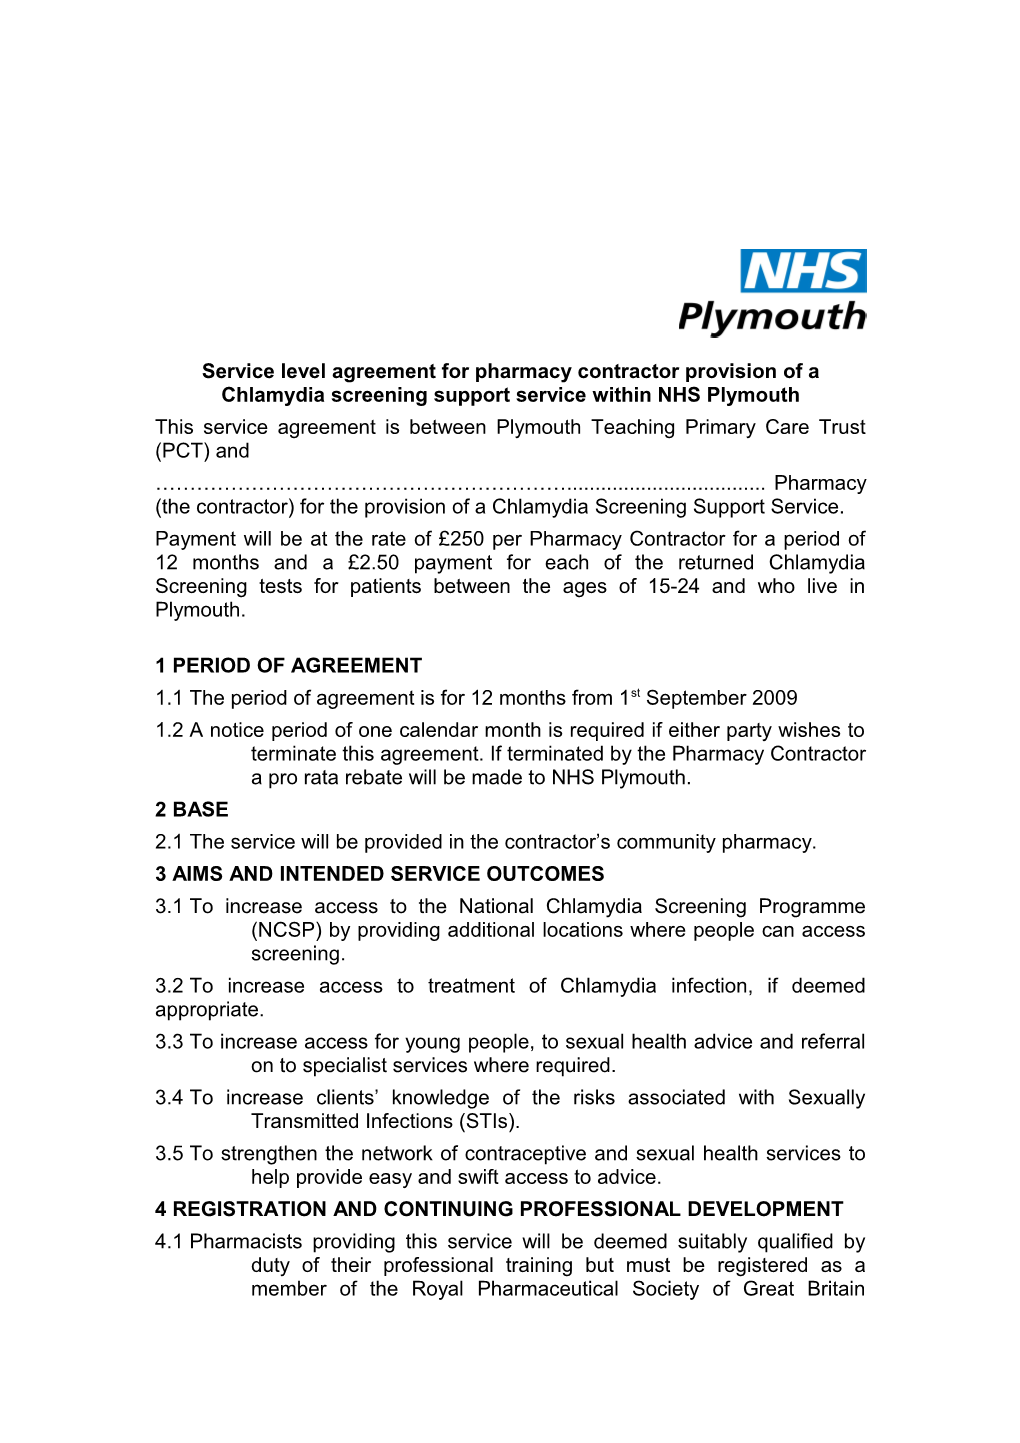 Service Level Agreement for Pharmacy Contractor Provision of a Chlamydia Screening Support